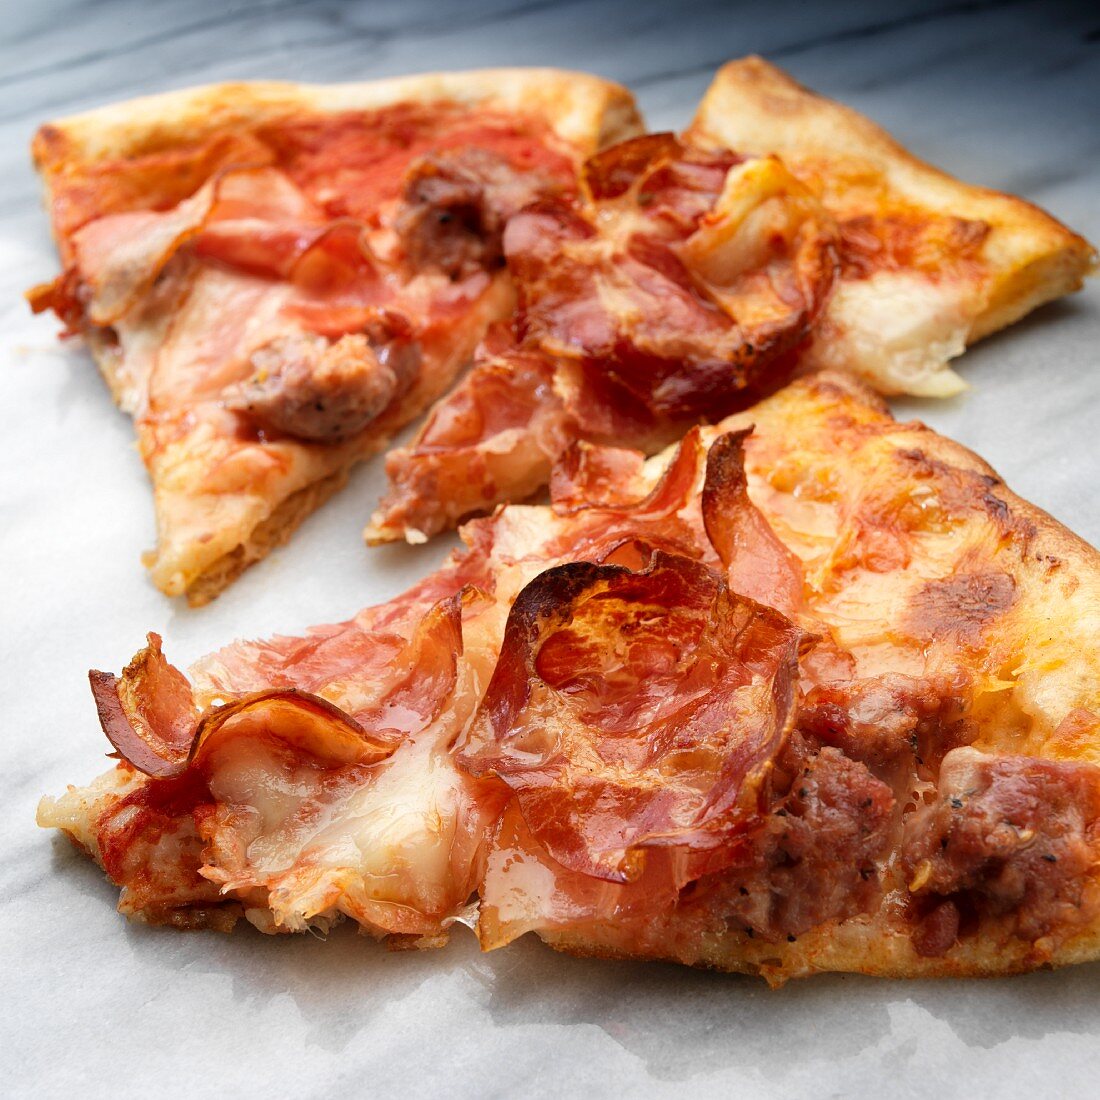 Slices of pizza with sausage, coppa and Prosciutto